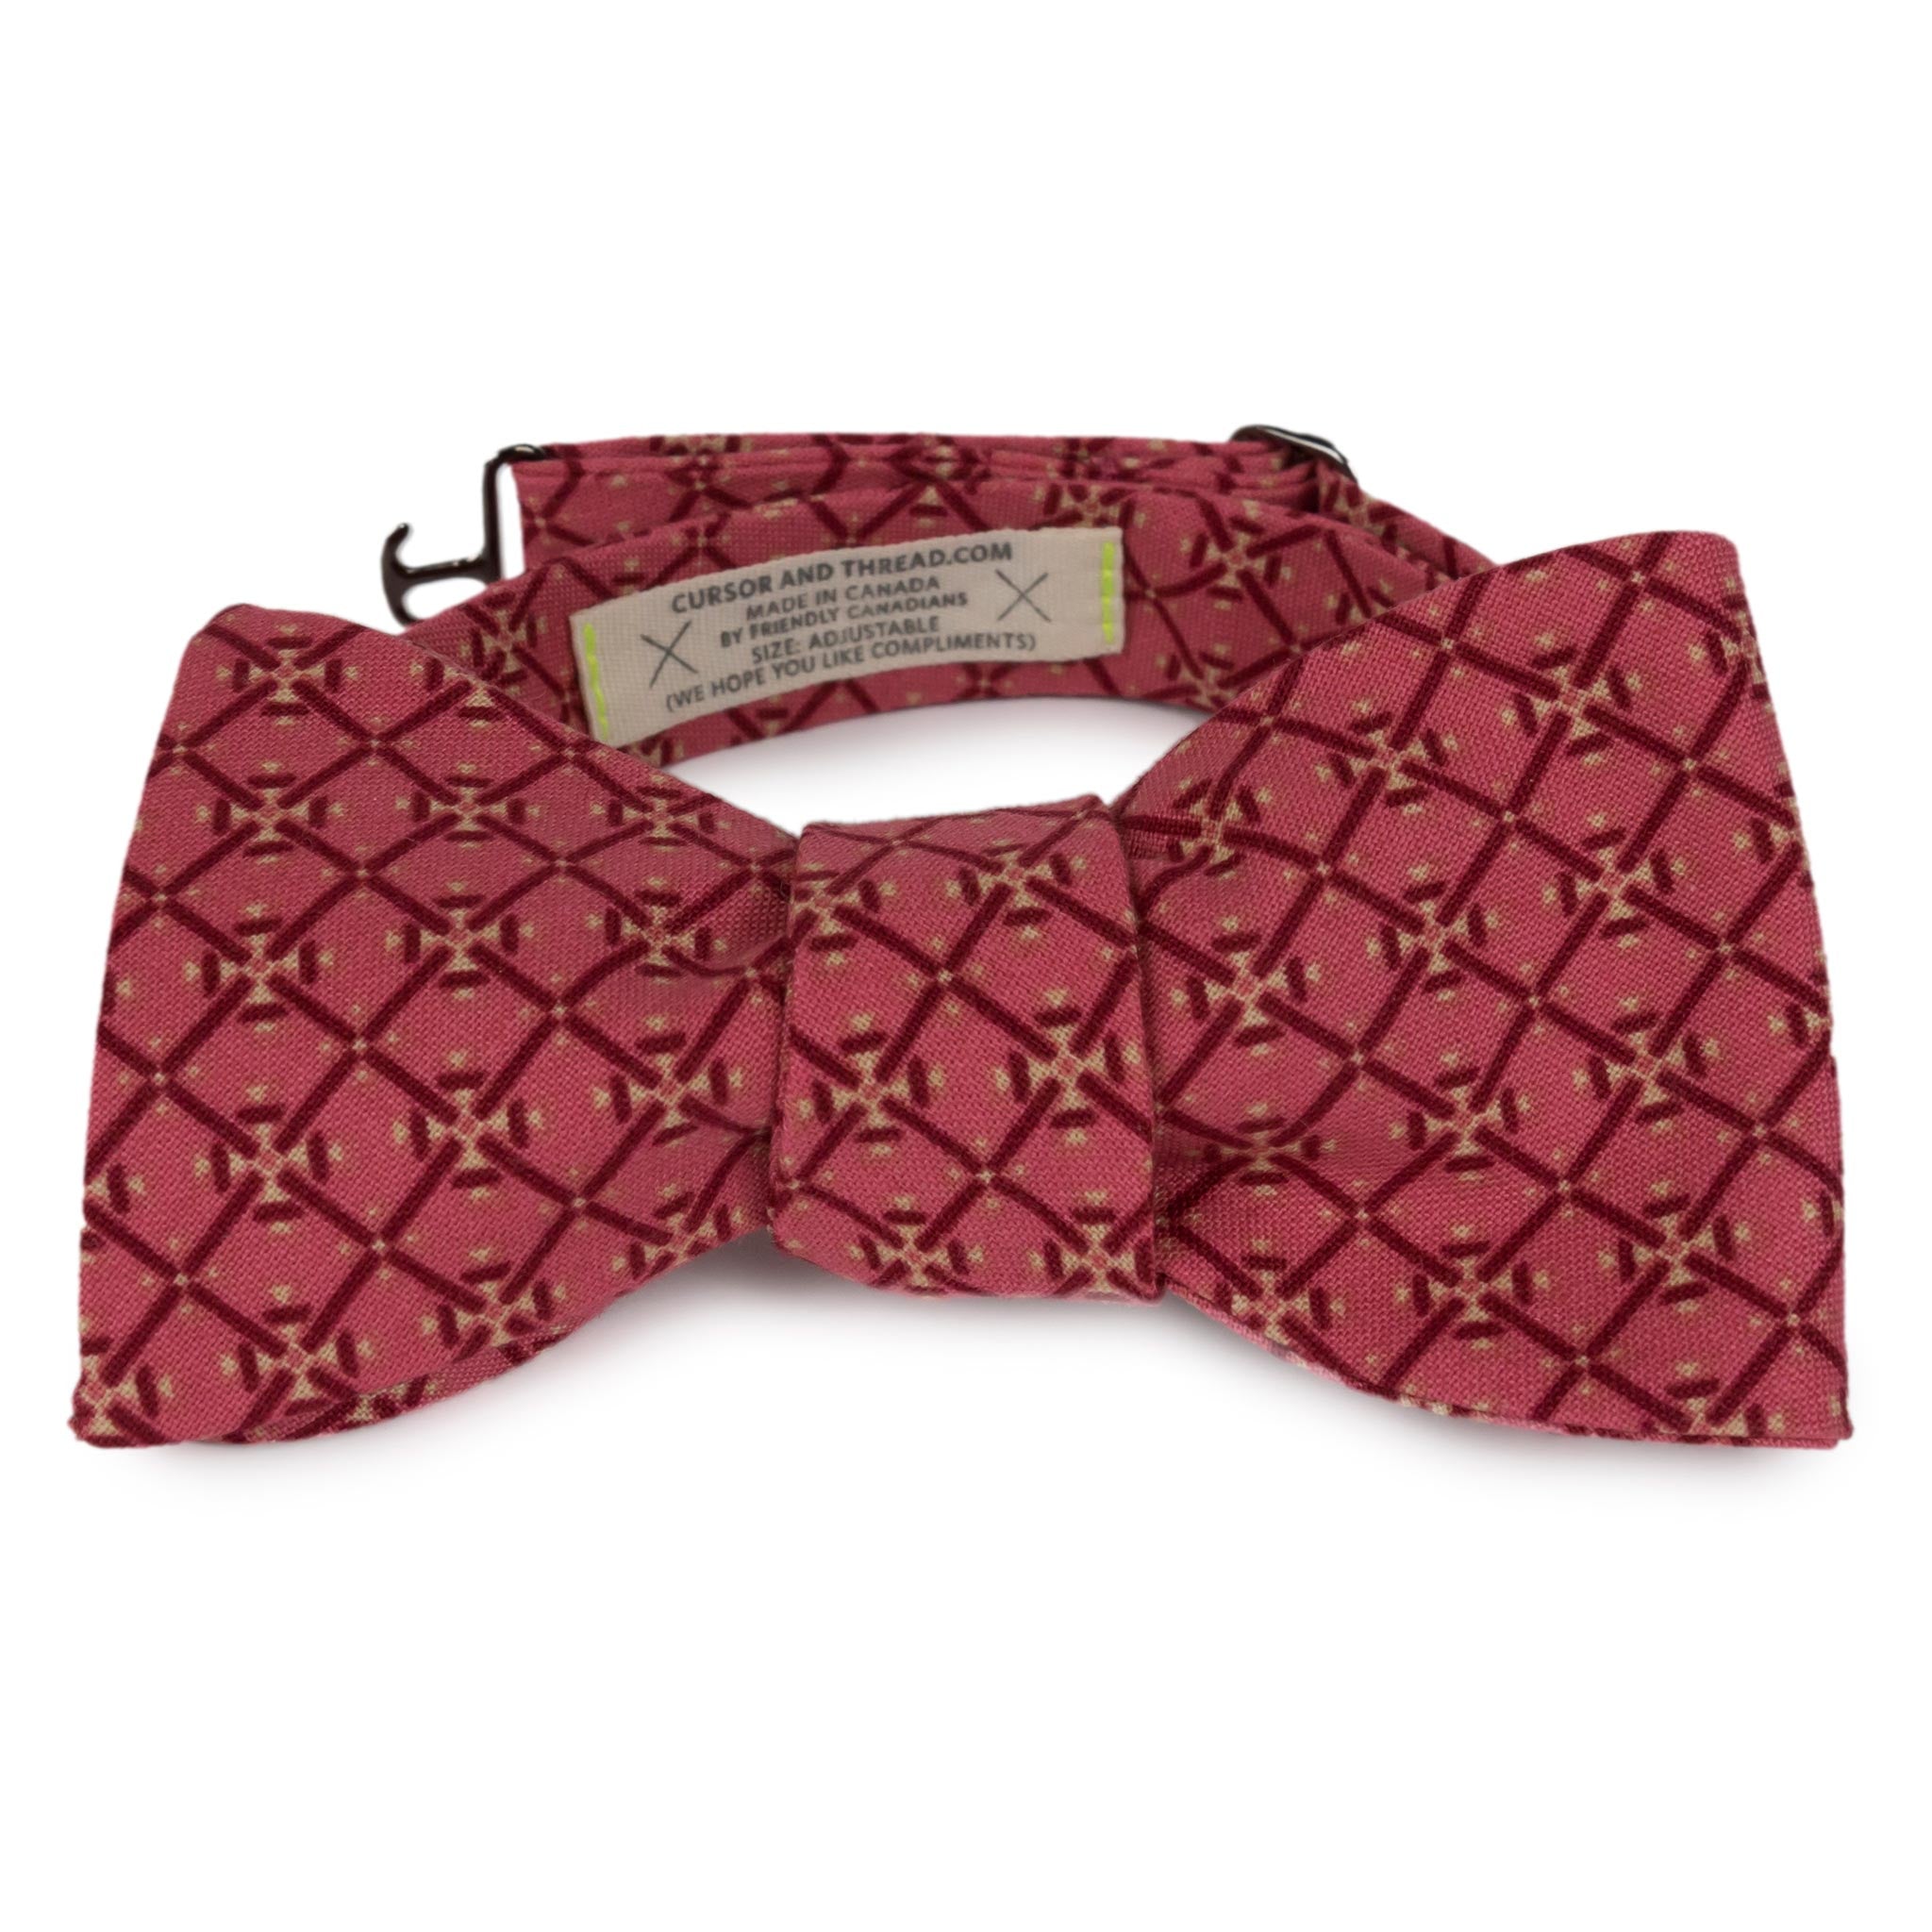 c. 1870 French Cotton Bow Tie Made in Canada by Cursor & Thread